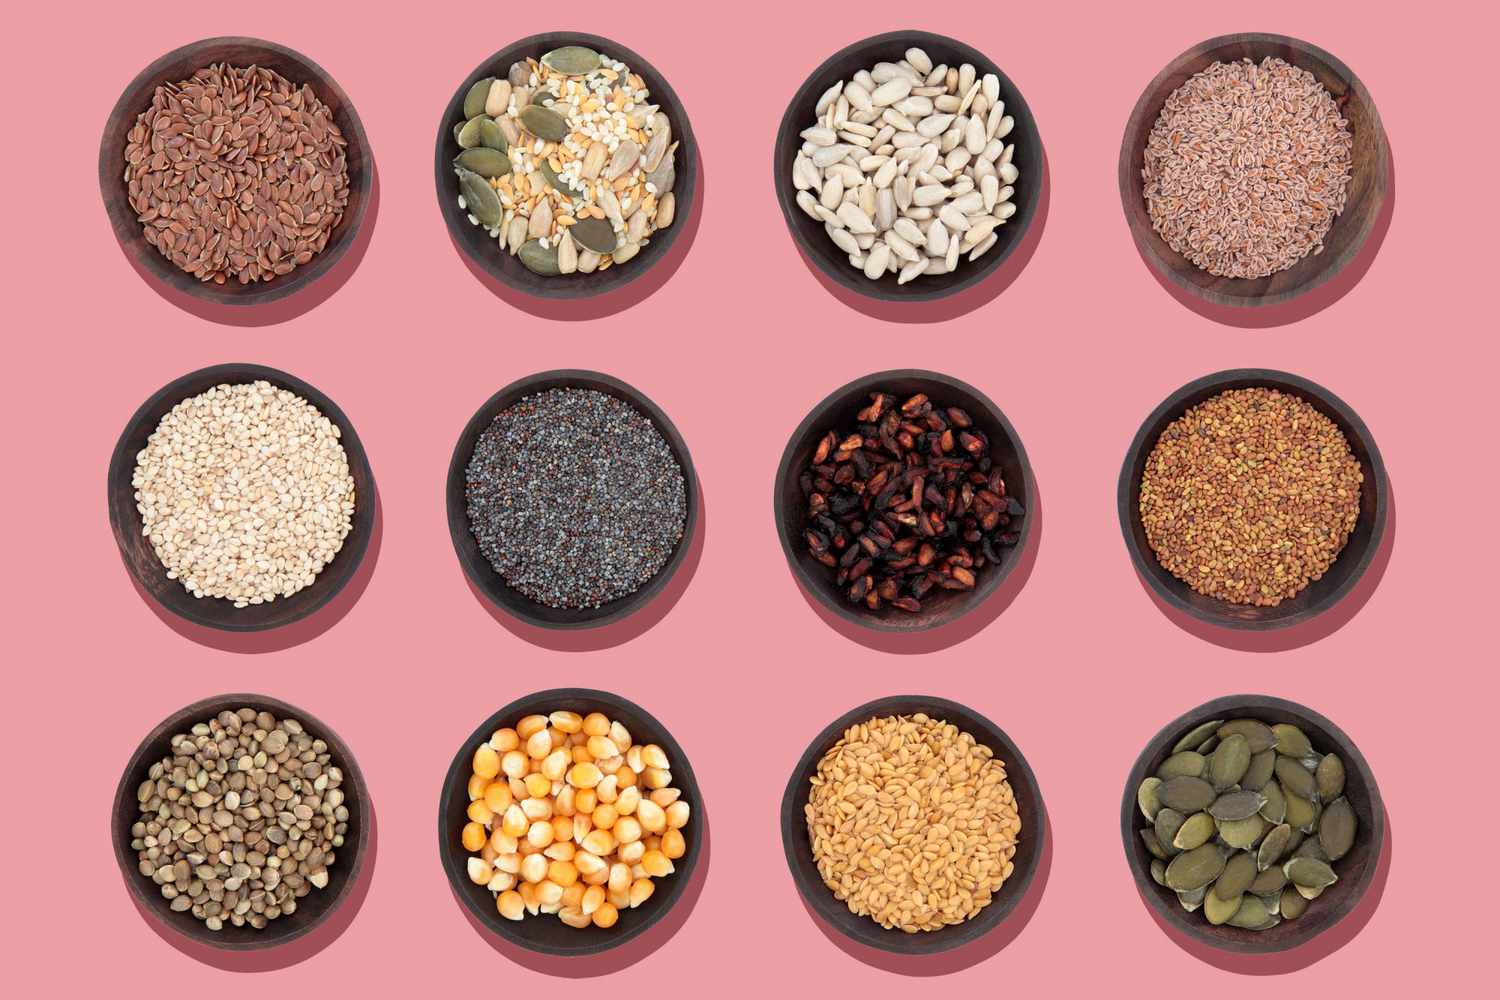 6 Healthiest Types of Seeds to Add to Your Diet | Real Simple